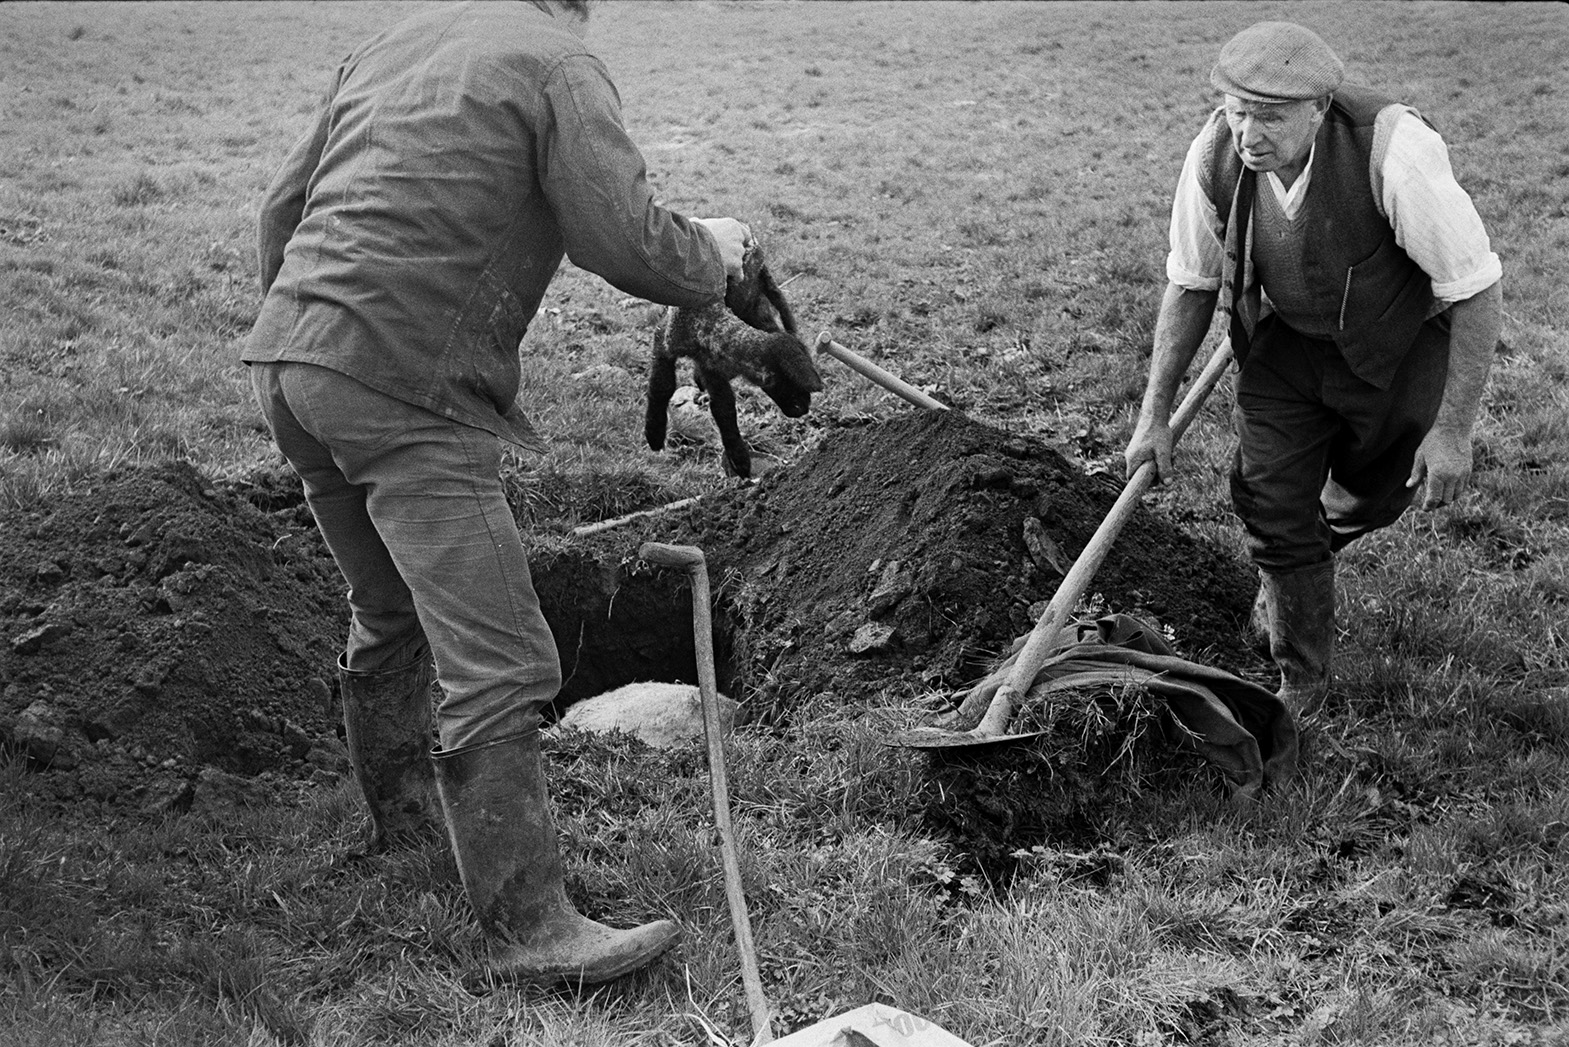 Ivor Bourne, on the left, and Tom Hooper, on the right, burying a dead sheep and lamb  in a hole in a field at Mill Road Farm, Beaford. They have dug the hole using spades. The farm was also known as Jeffrys.